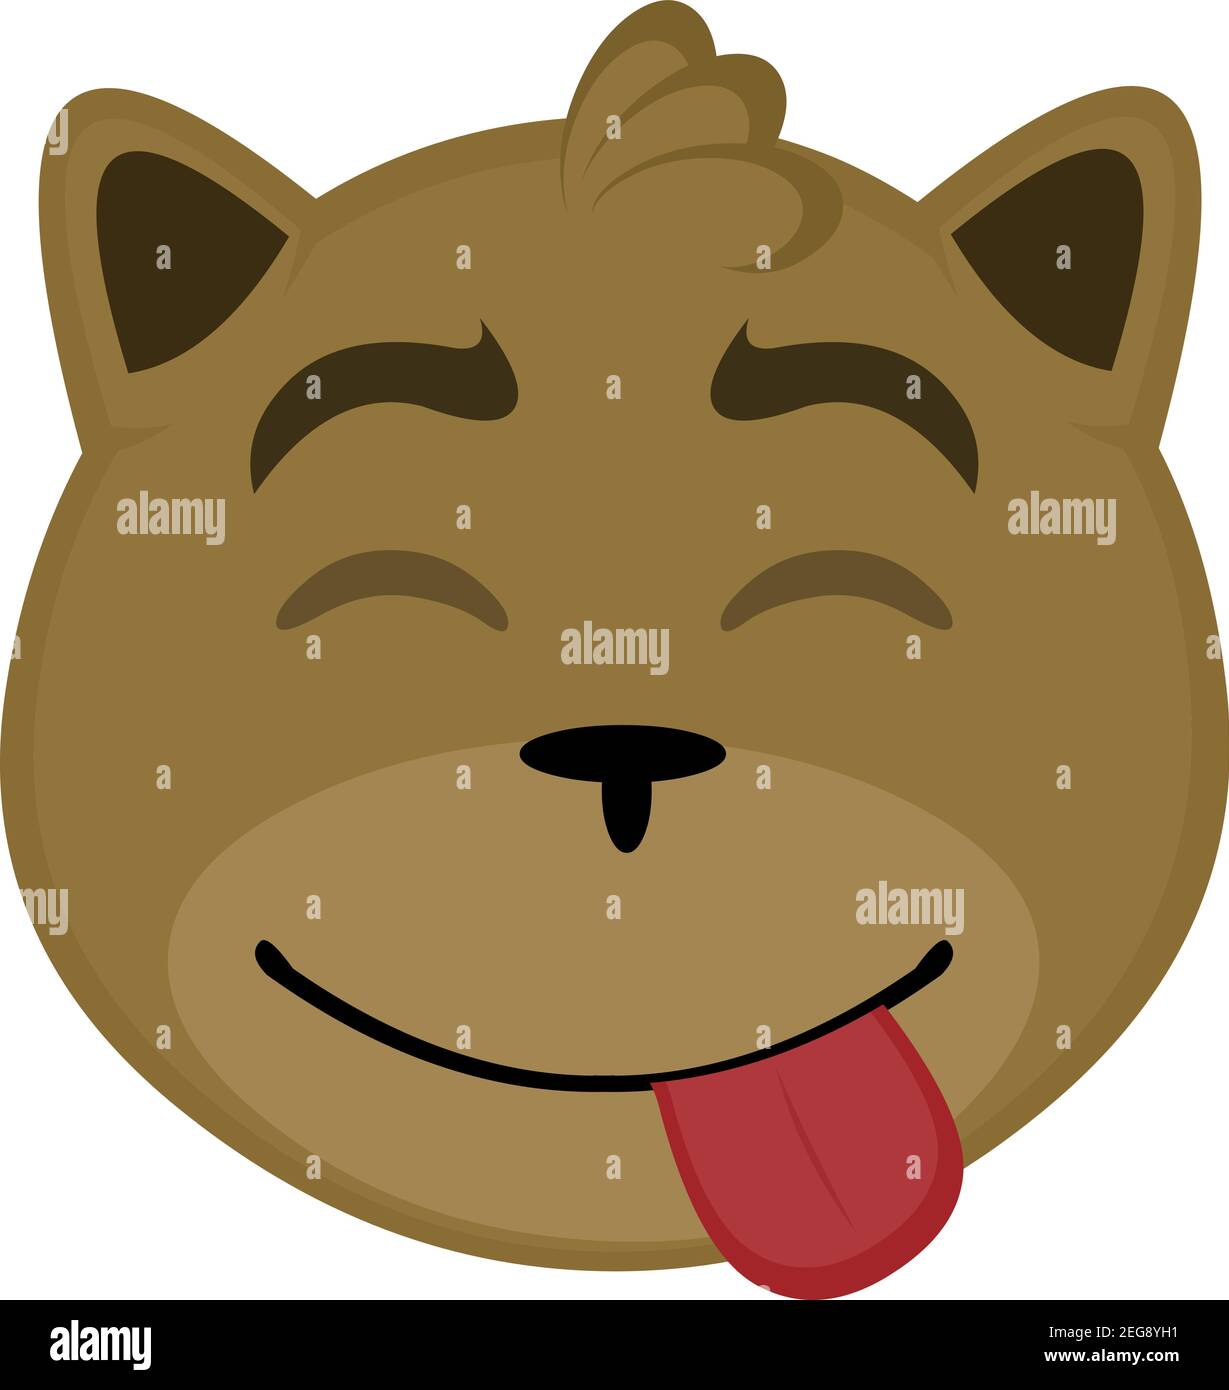 Vector emoticon  illustration cartoon of a cat's head with a joyful expression of pleasure with its eyes closed and sticking out its tongue Stock Vector